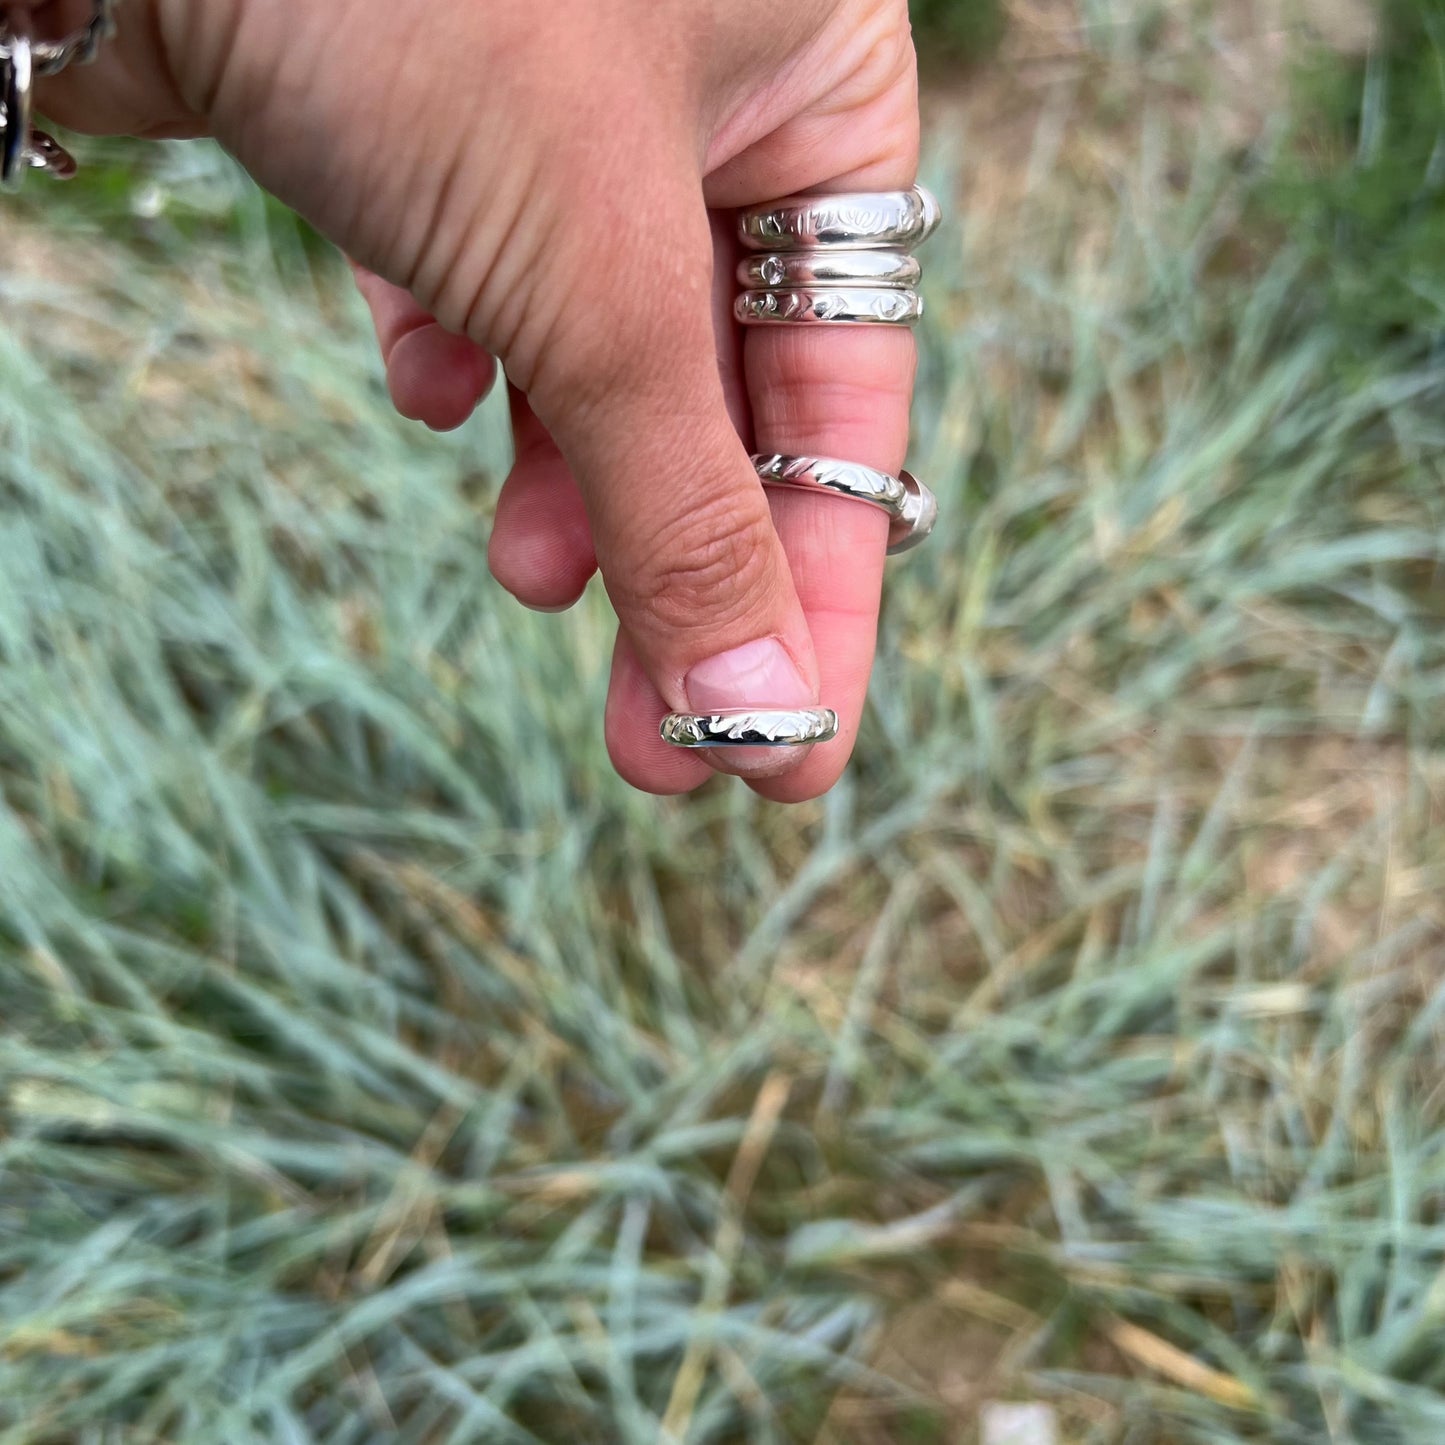 "Ancient stack" patterned ring